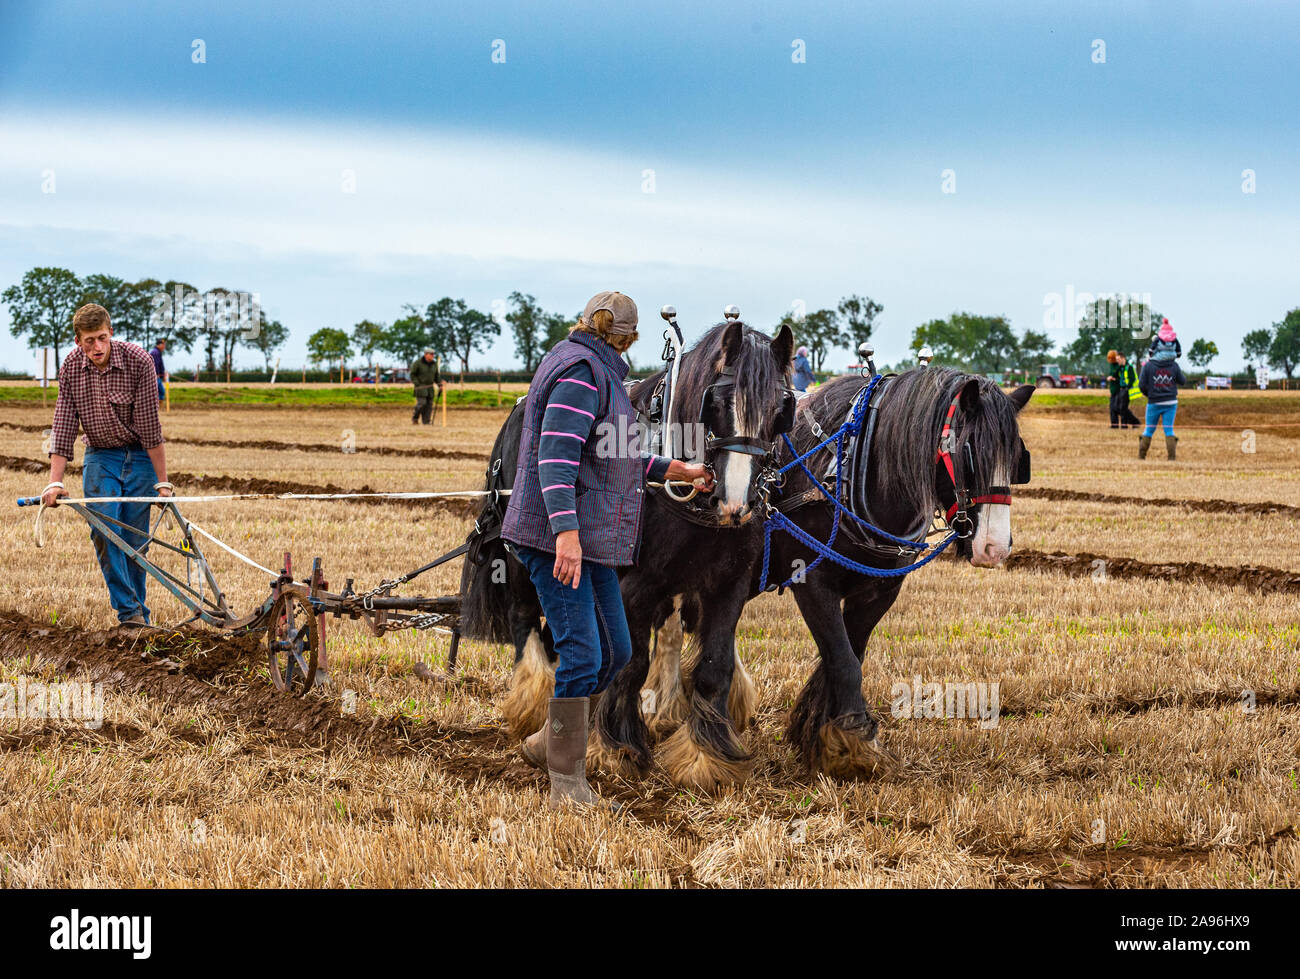 British National Ploughing Championships, Lincoln, UK - Heavy Horses in the ploughing competition Stock Photo